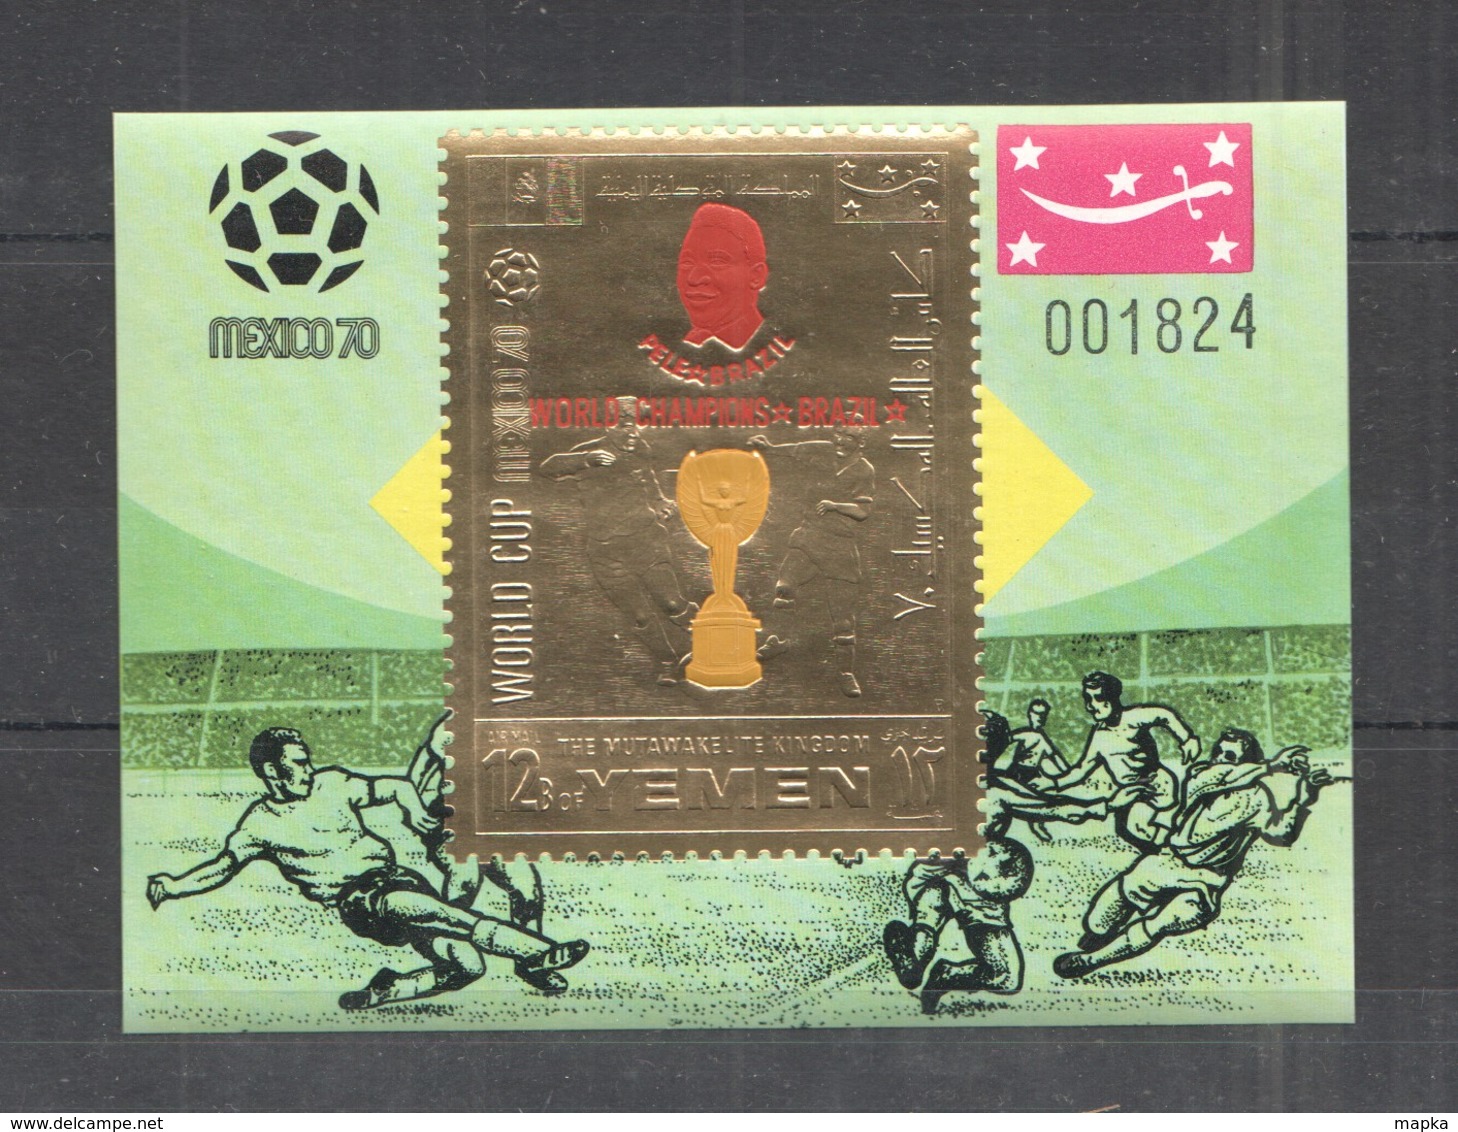 XX212 IMPERF YEMEN GOLD WORLD CUP MEXICO 1970 FOOTBALL OVERPRINT PELE BL MNH - 1970 – Mexique